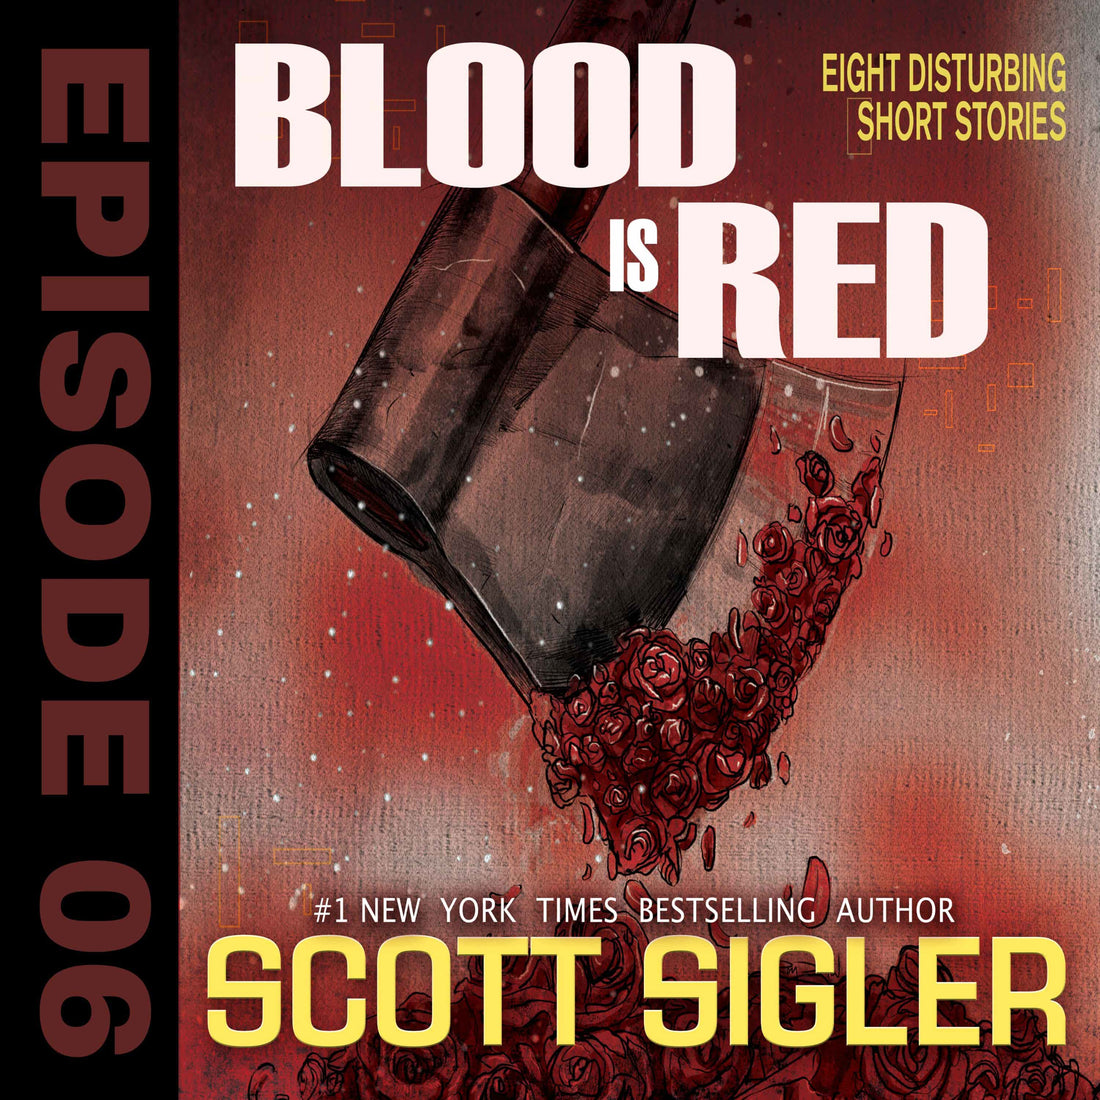 BLOOD IS RED Episode 6: “The Great Snipe Hunt” Part II